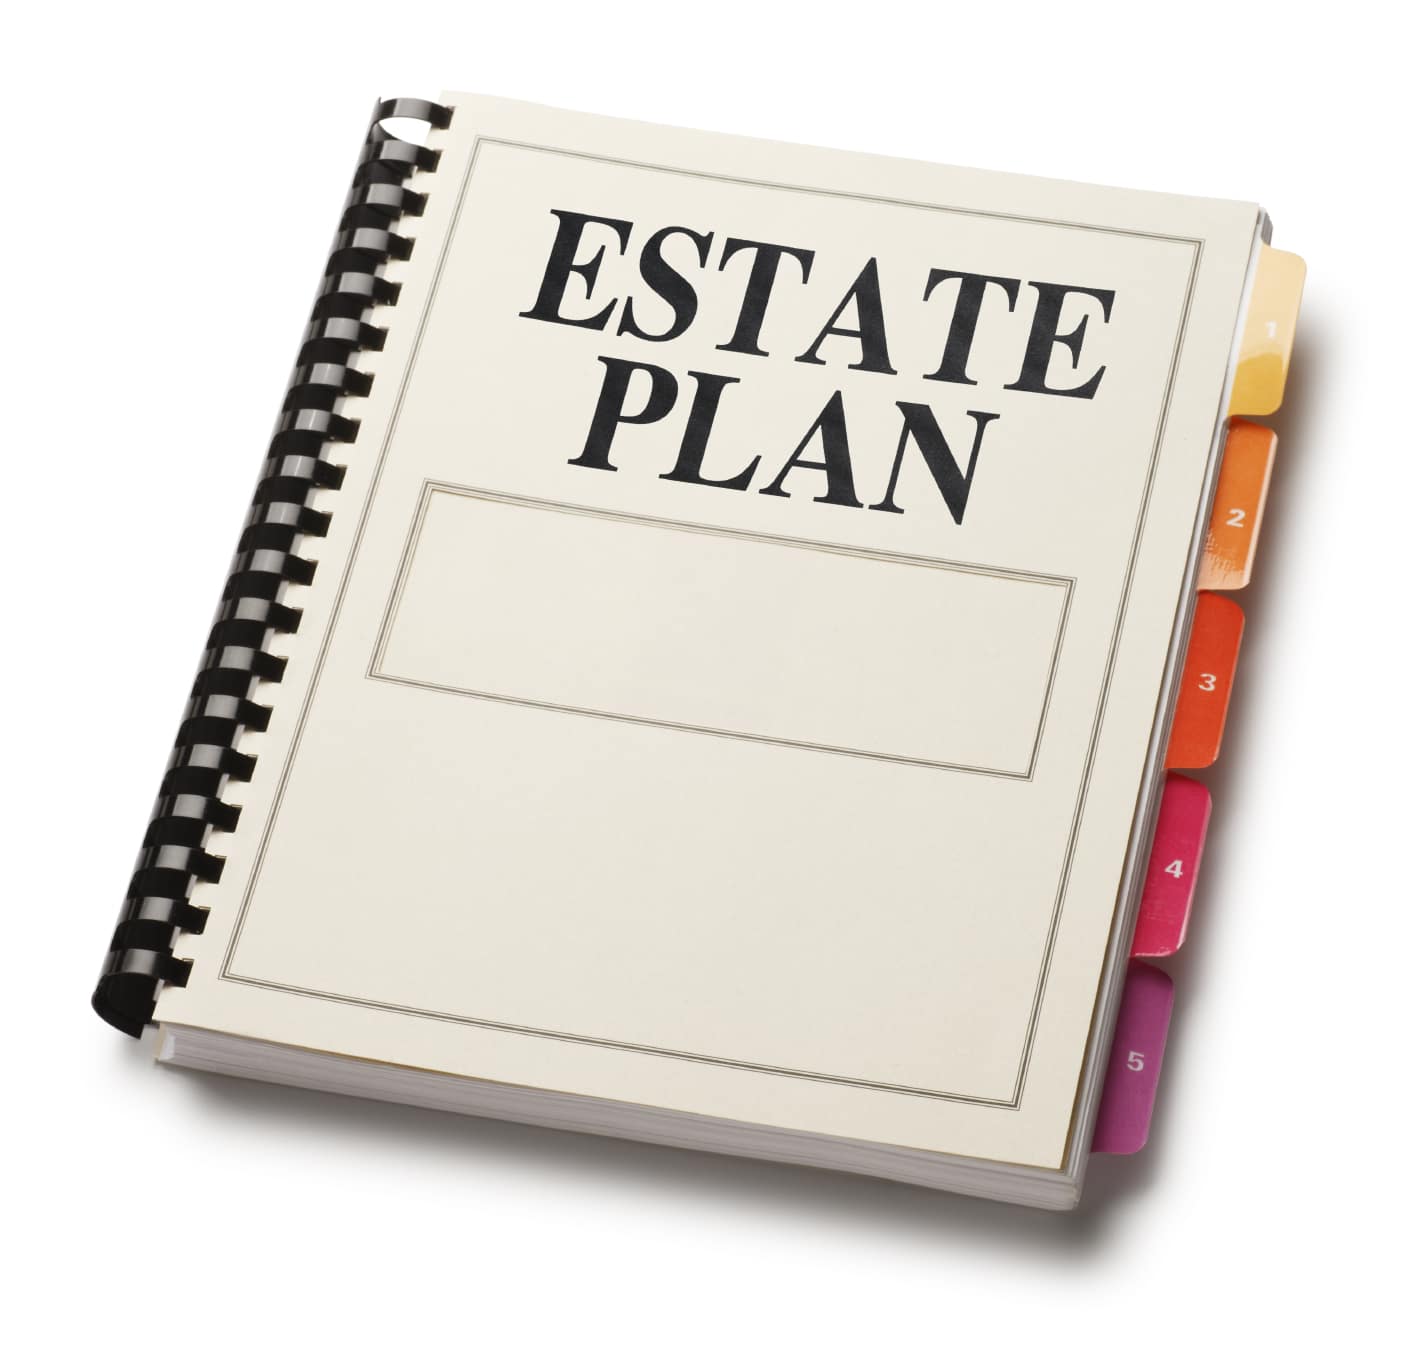 What Is the Purpose of an Estate Plan?